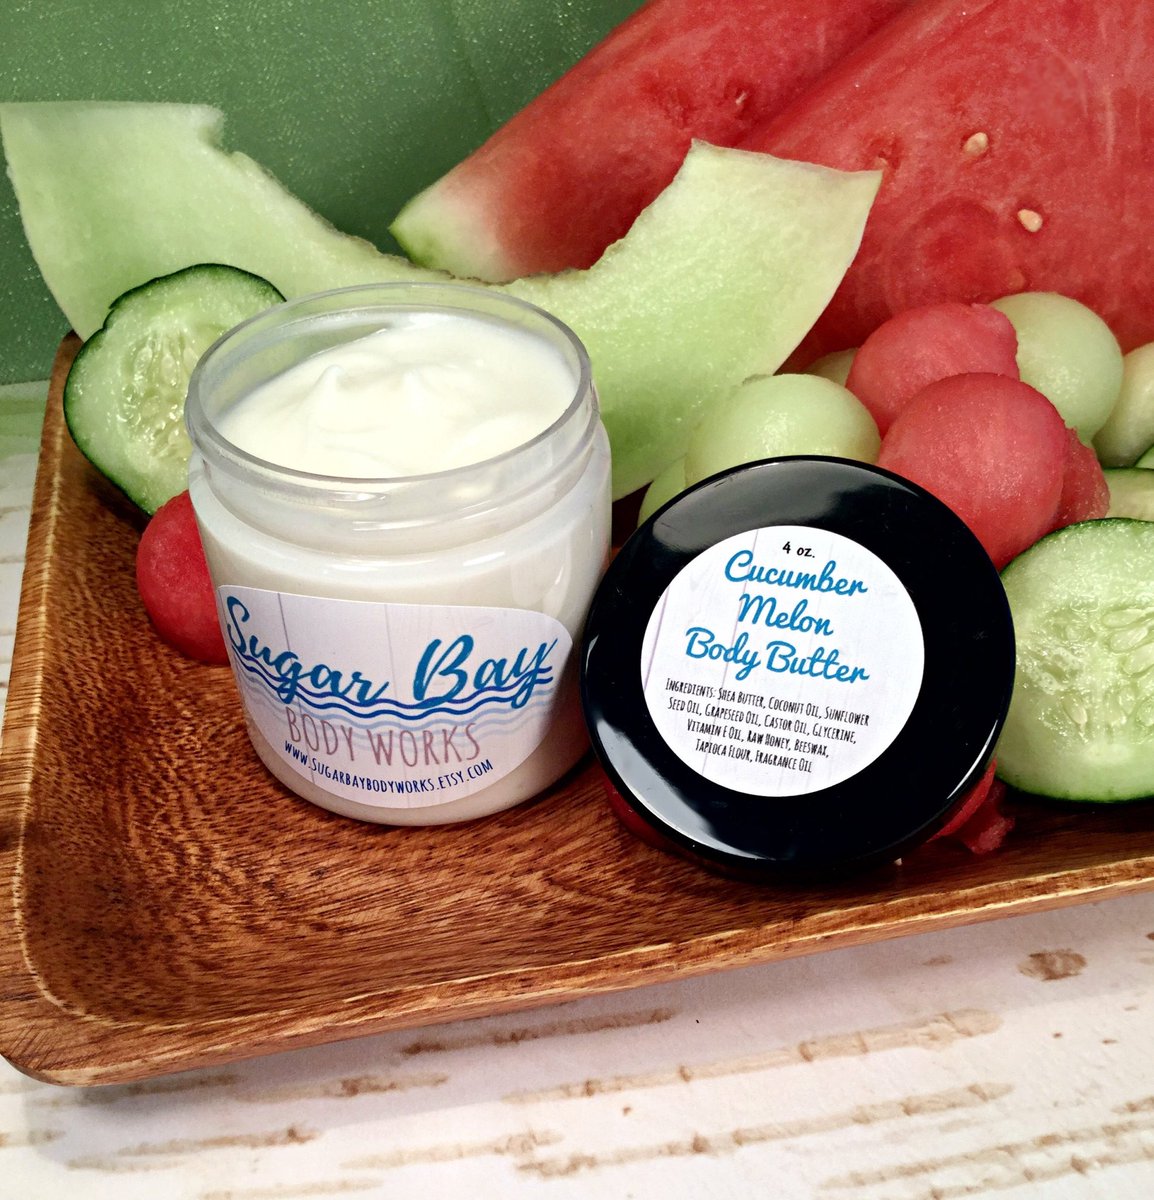 Excited to share the latest addition to my #etsy shop: Cucumber Melon Body Butter #Natural Body Butter Cucumber Melon Lotion Melon Hand Cream #Whipped #BodyButter #SkinMoisturizer #BirthdayGift etsy.me/2FKr0QZ